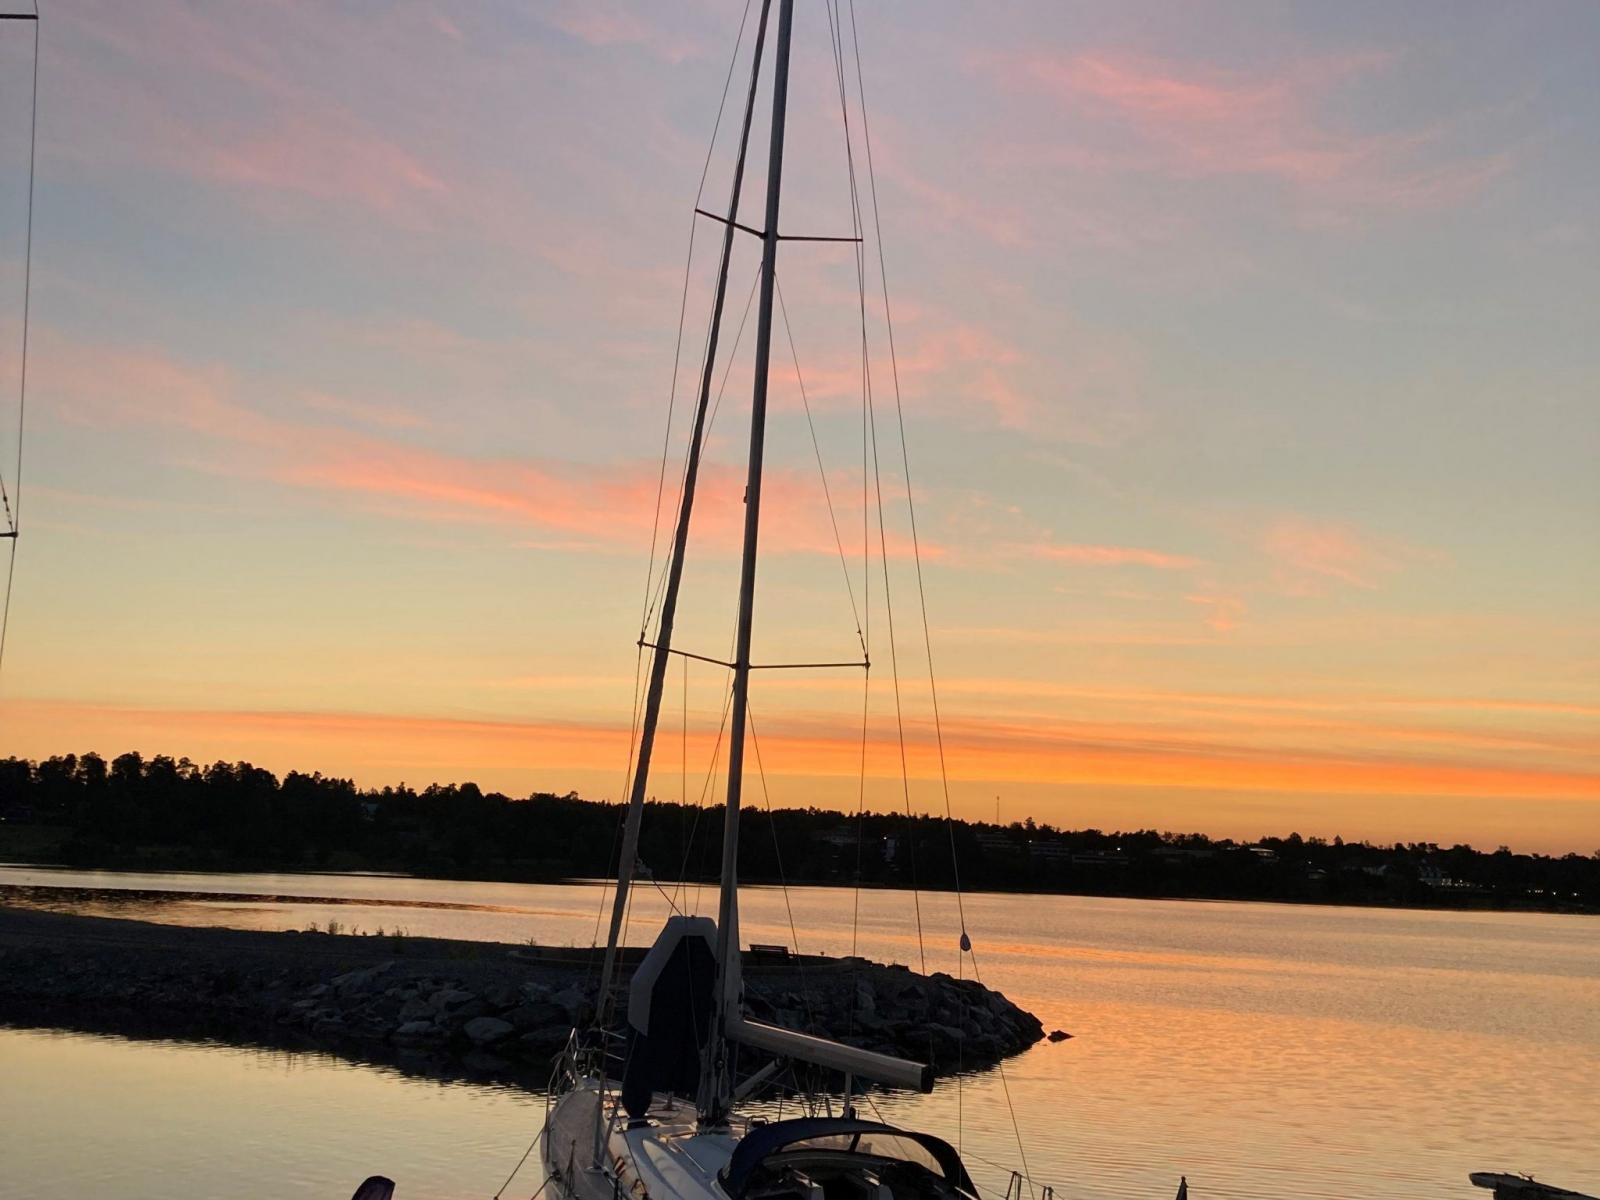 Rent a sailing boat in the High Coast this summer